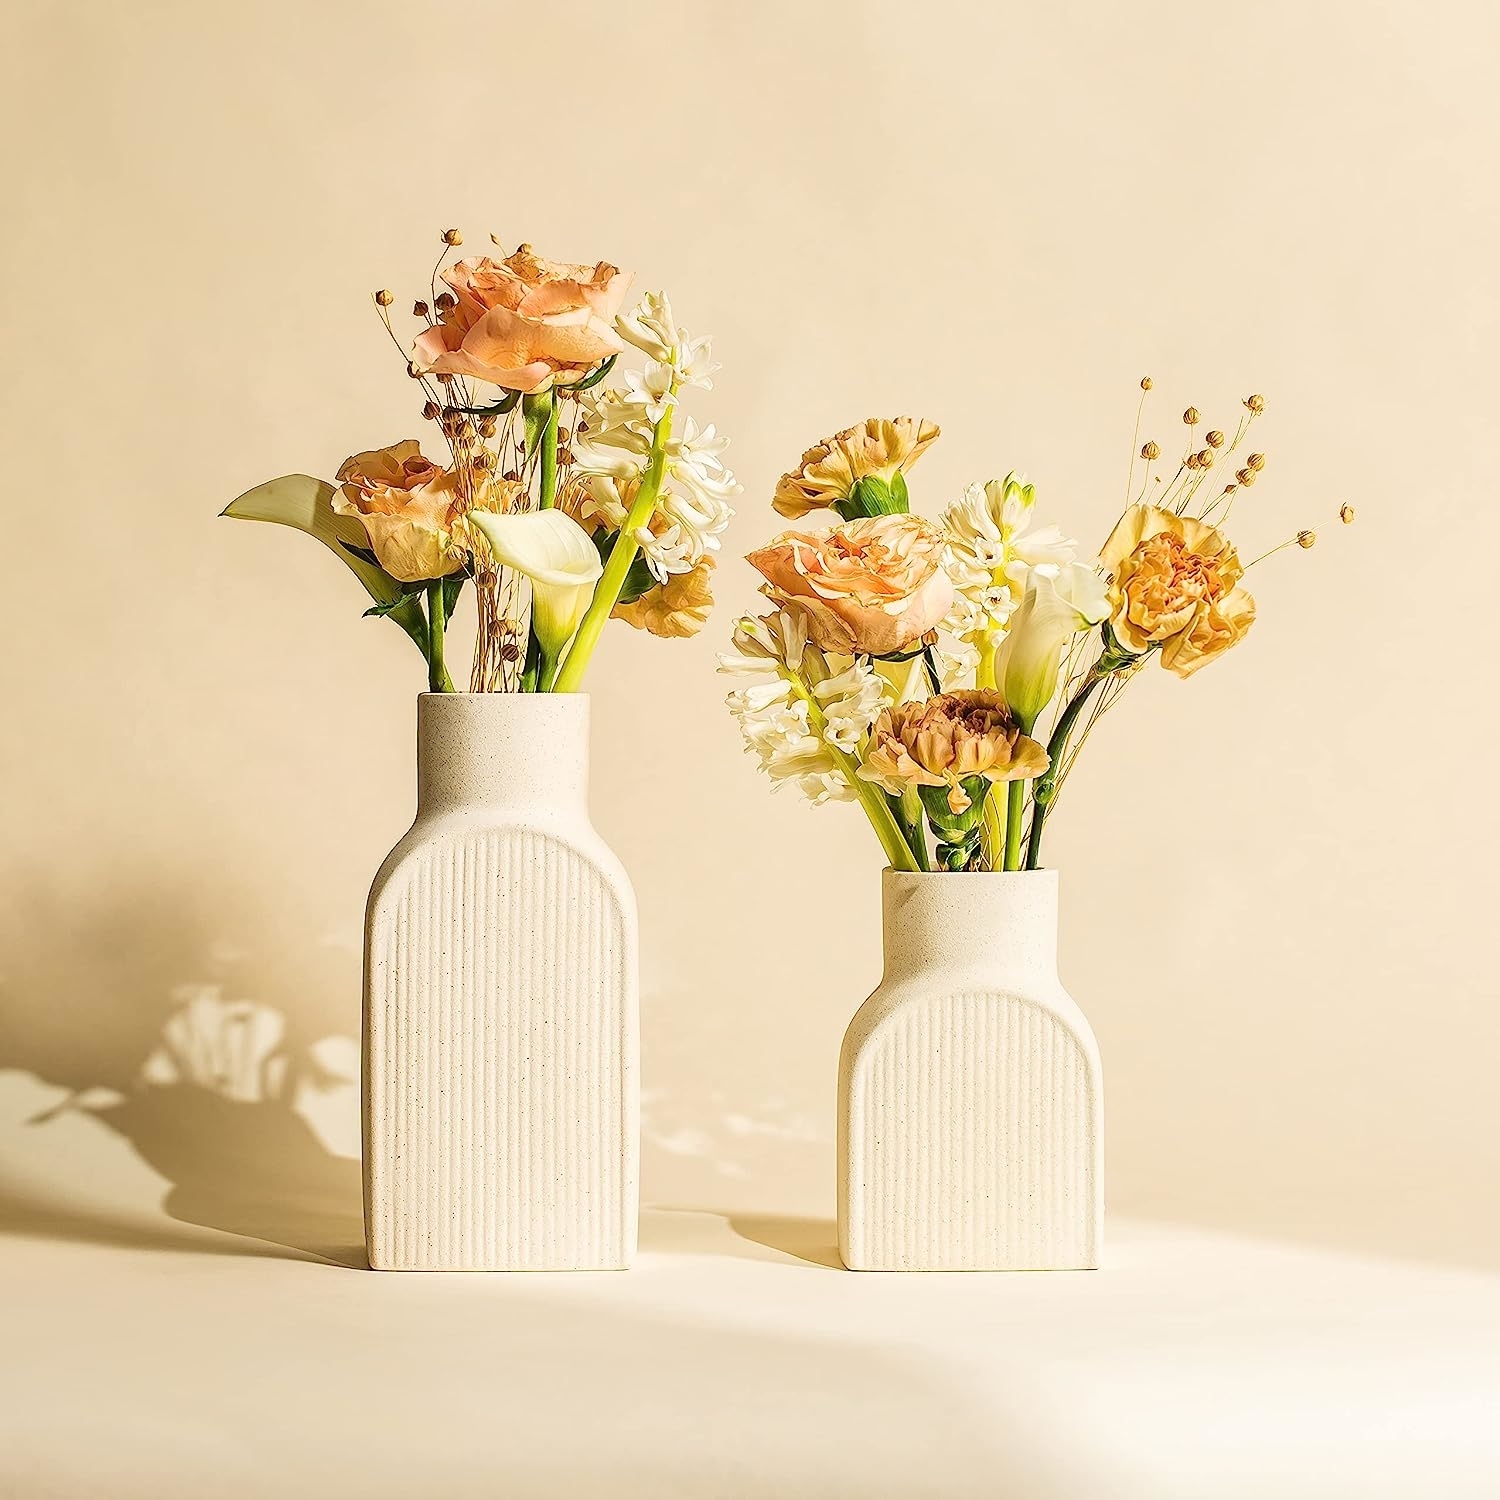 two vases of different sizes holding flowers